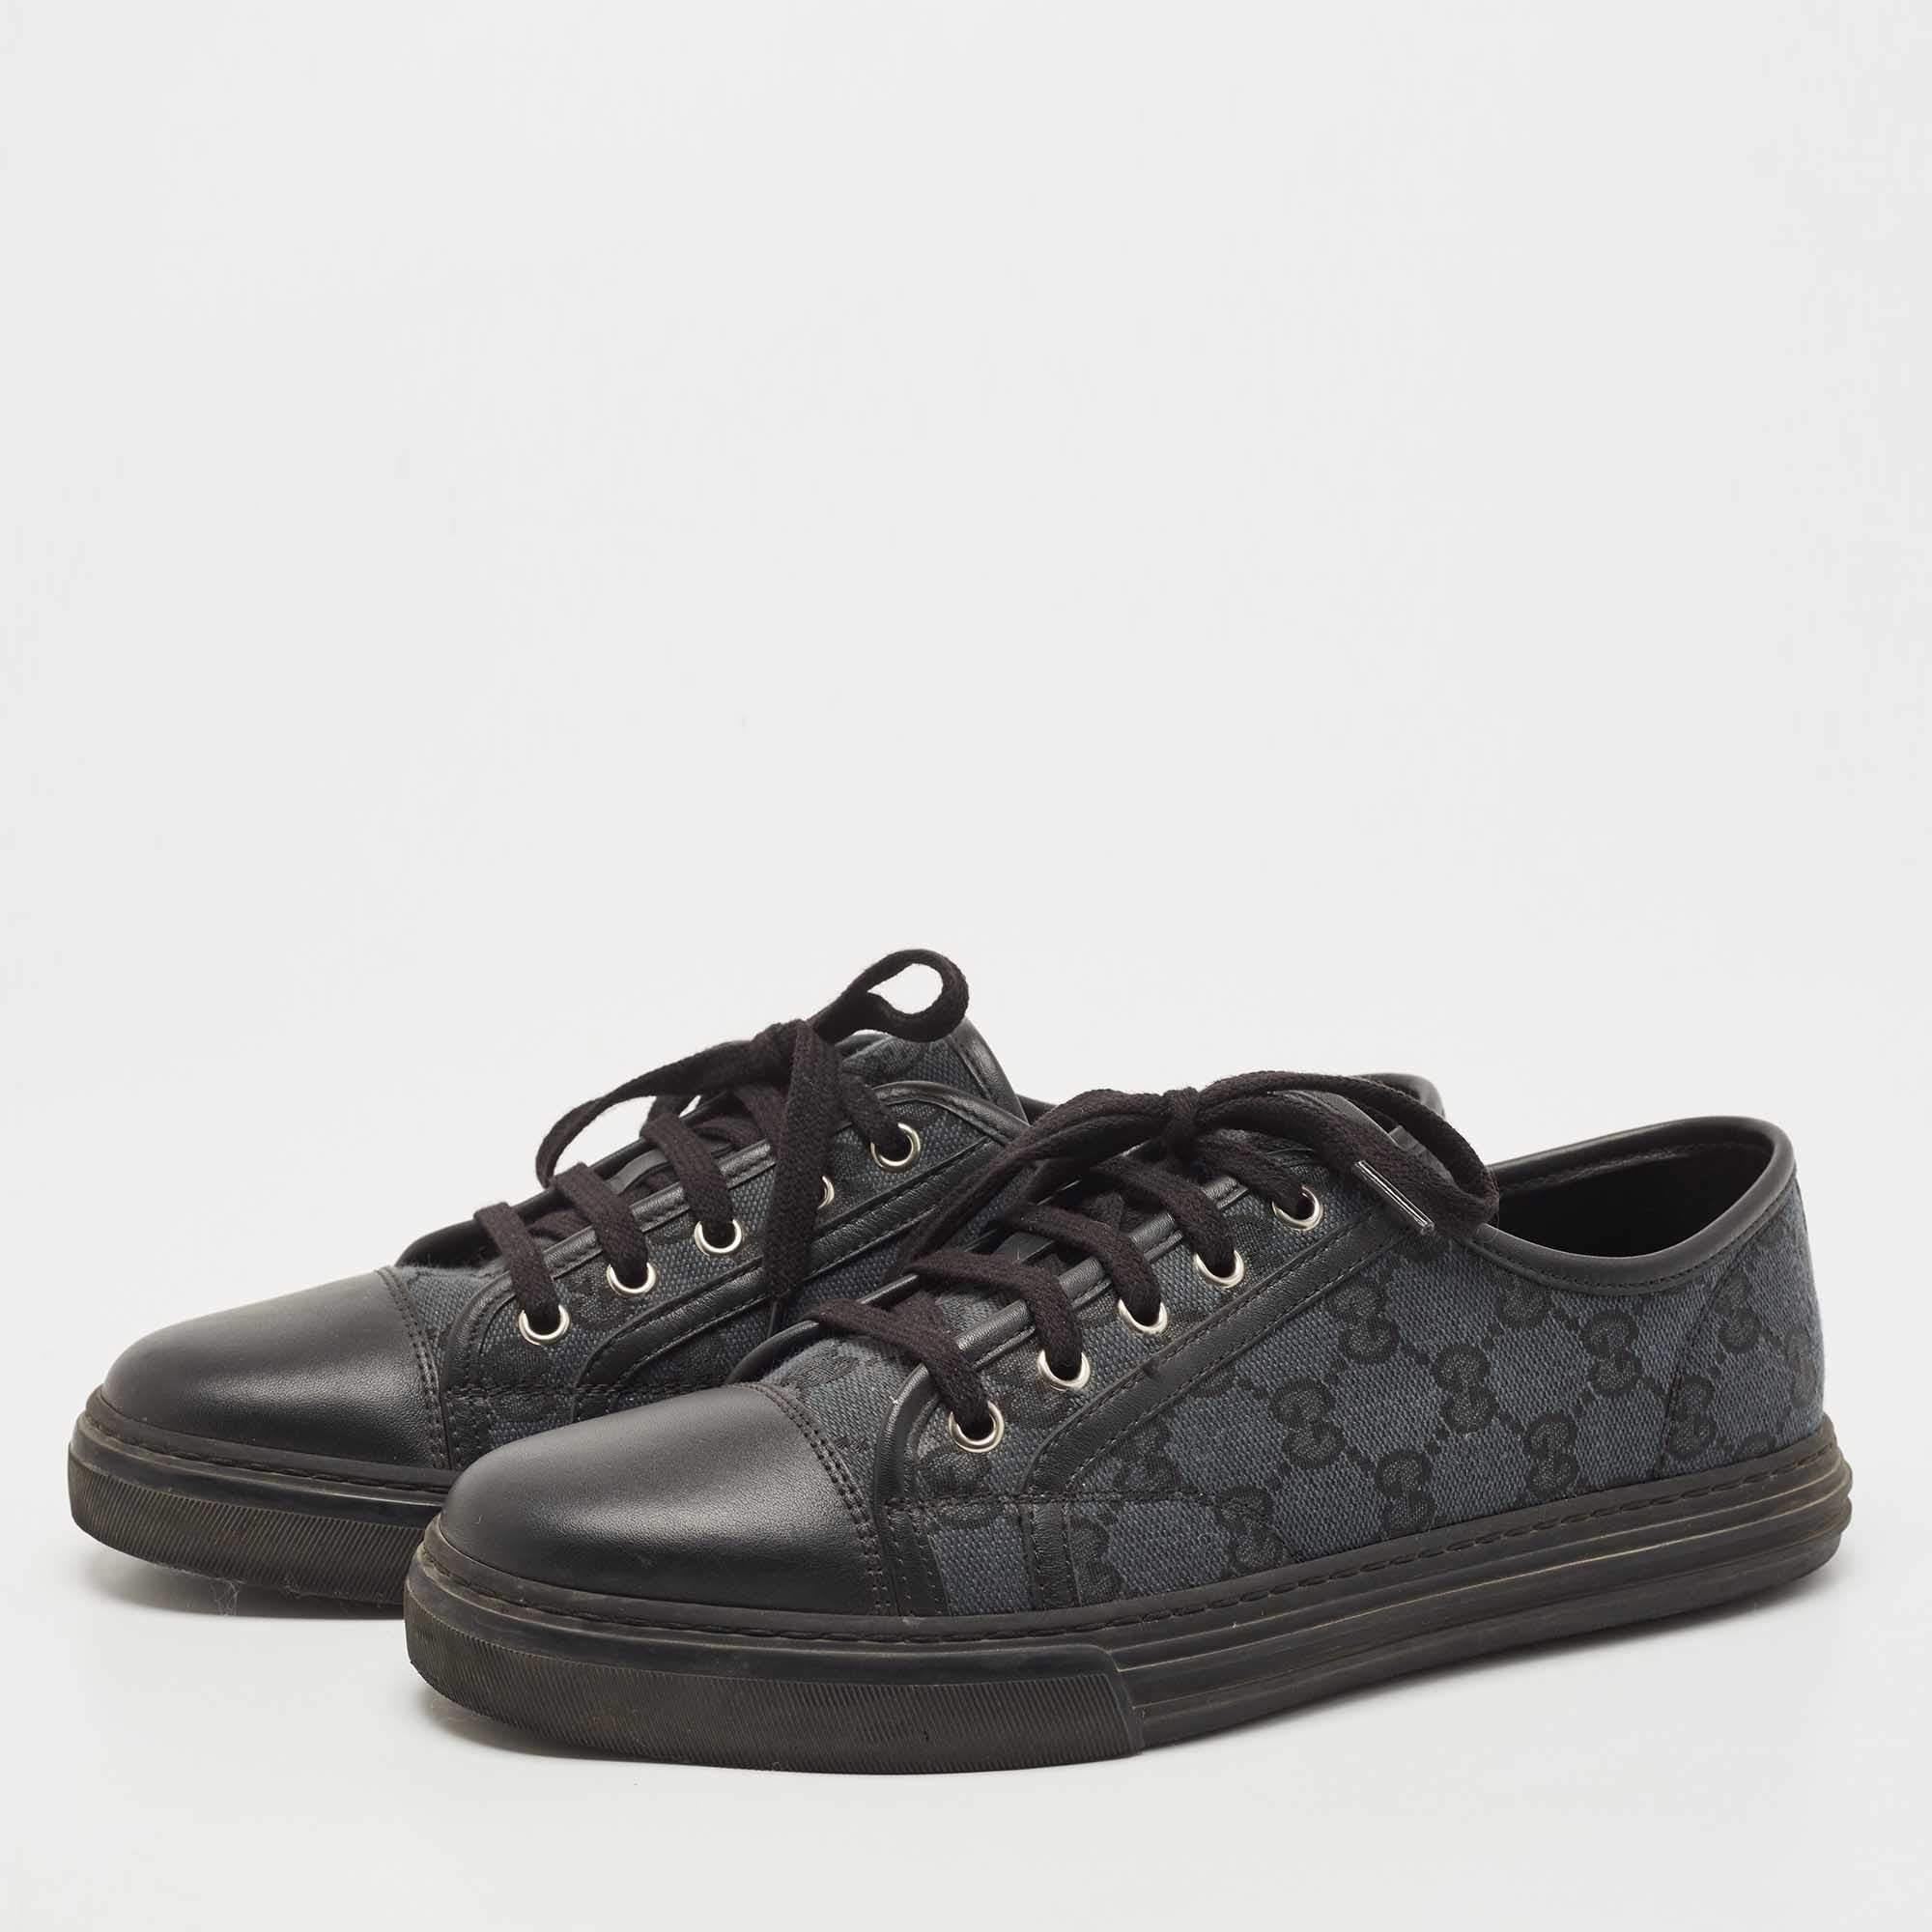 Add a statement appeal to your outfit with these sneakers. Made from premium materials, they feature lace-up vamps and relaxing footbeds. The rubber sole of this pair aims to provide you with everyday ease.


Includes
Original Dustbag, Original Box,